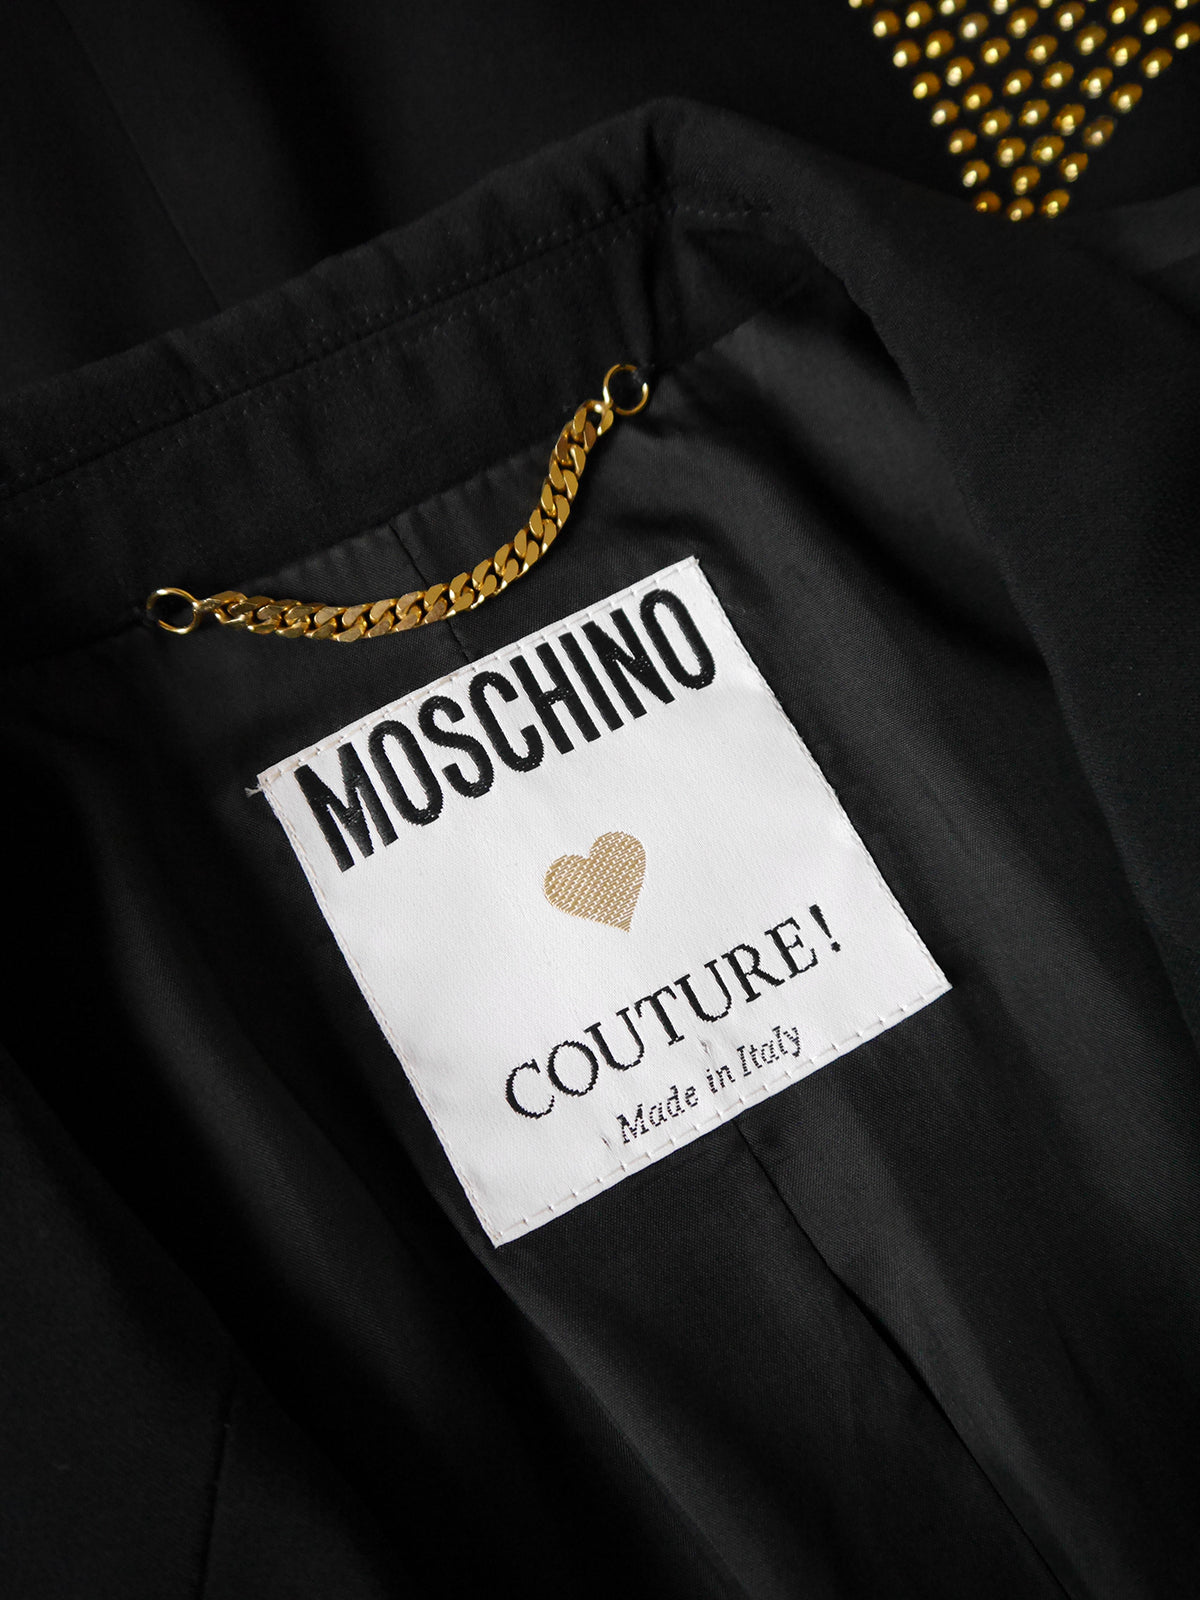 MOSCHINO Couture! 1990s Vintage Rhinestone Studded Jacket